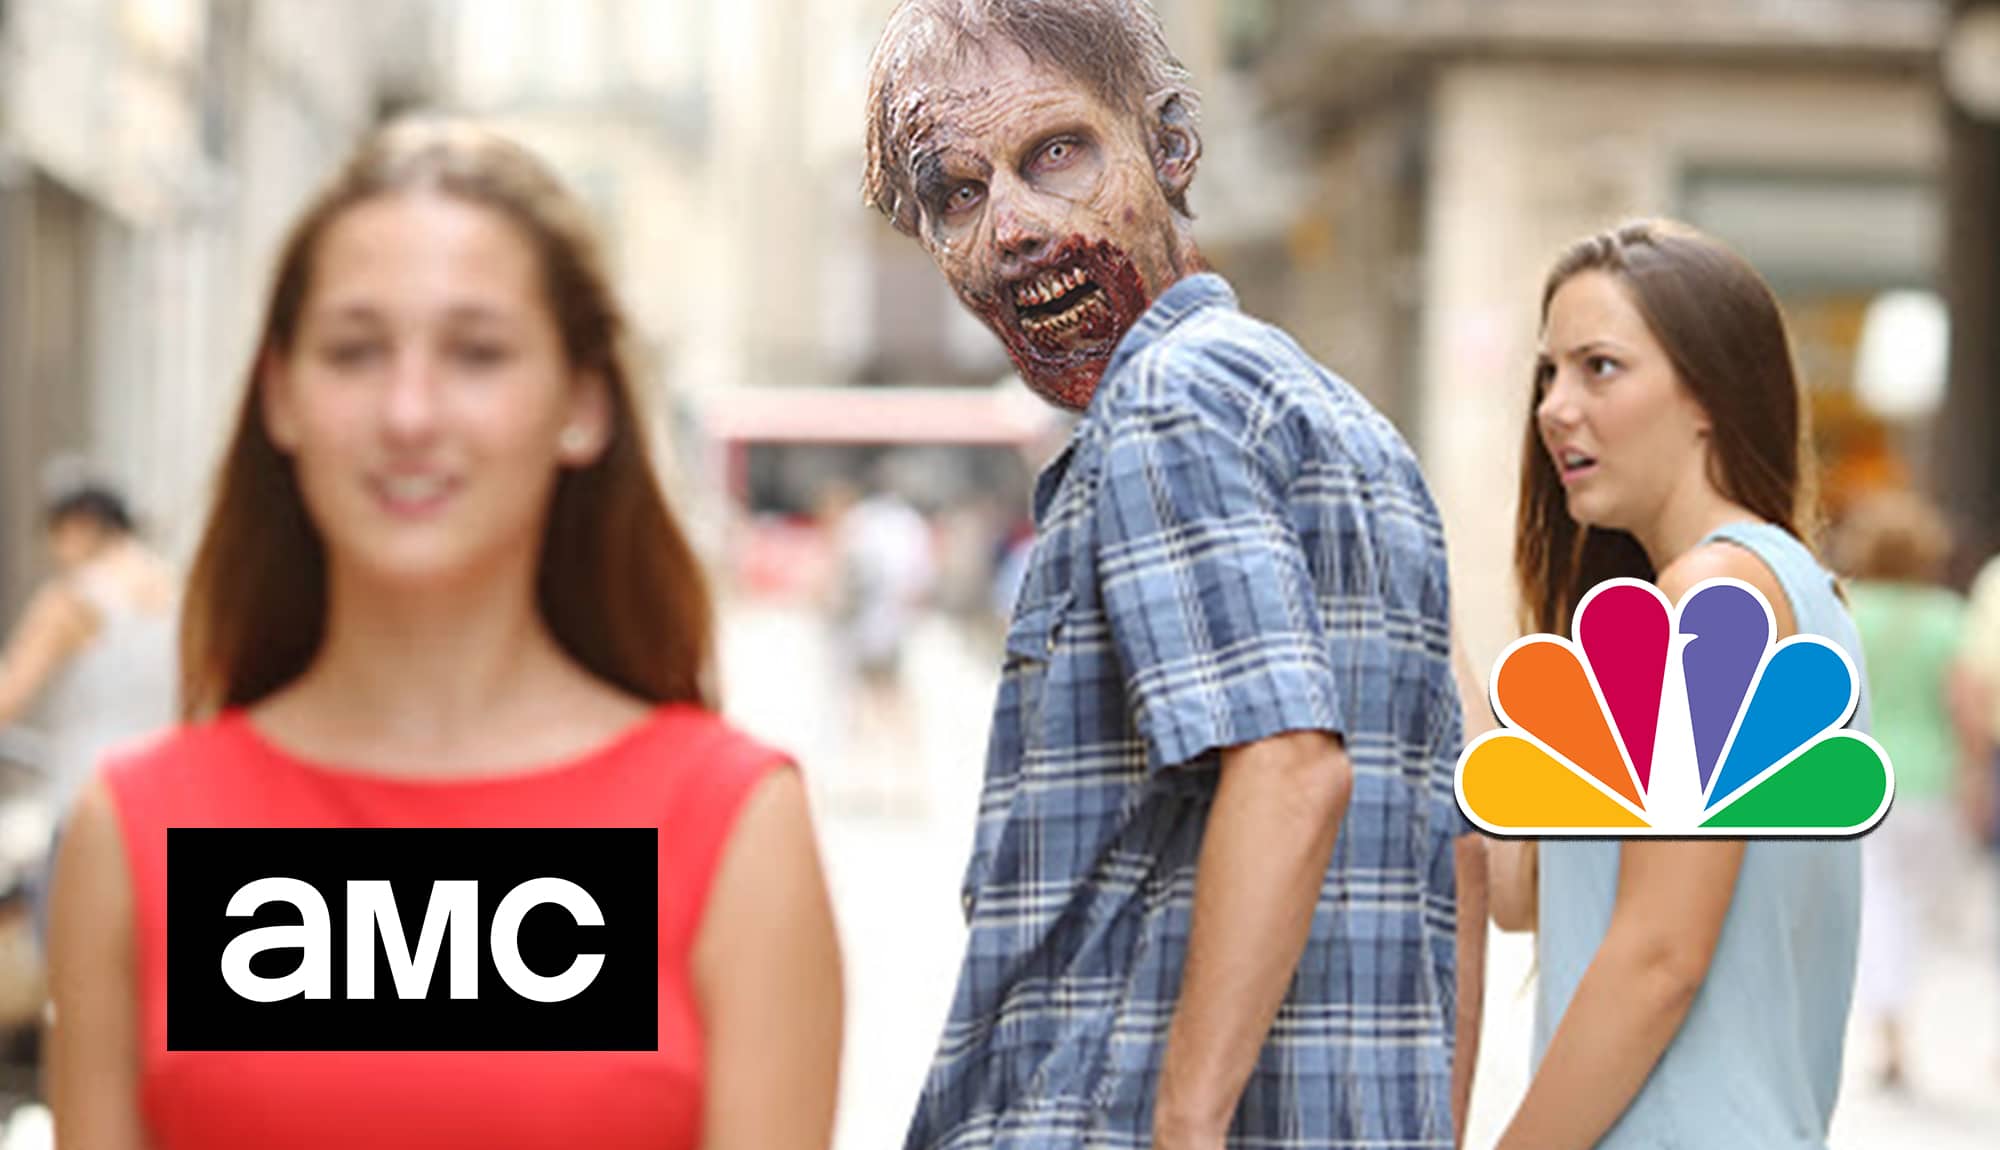 How The Walking Dead Almost Ended Up On NBC